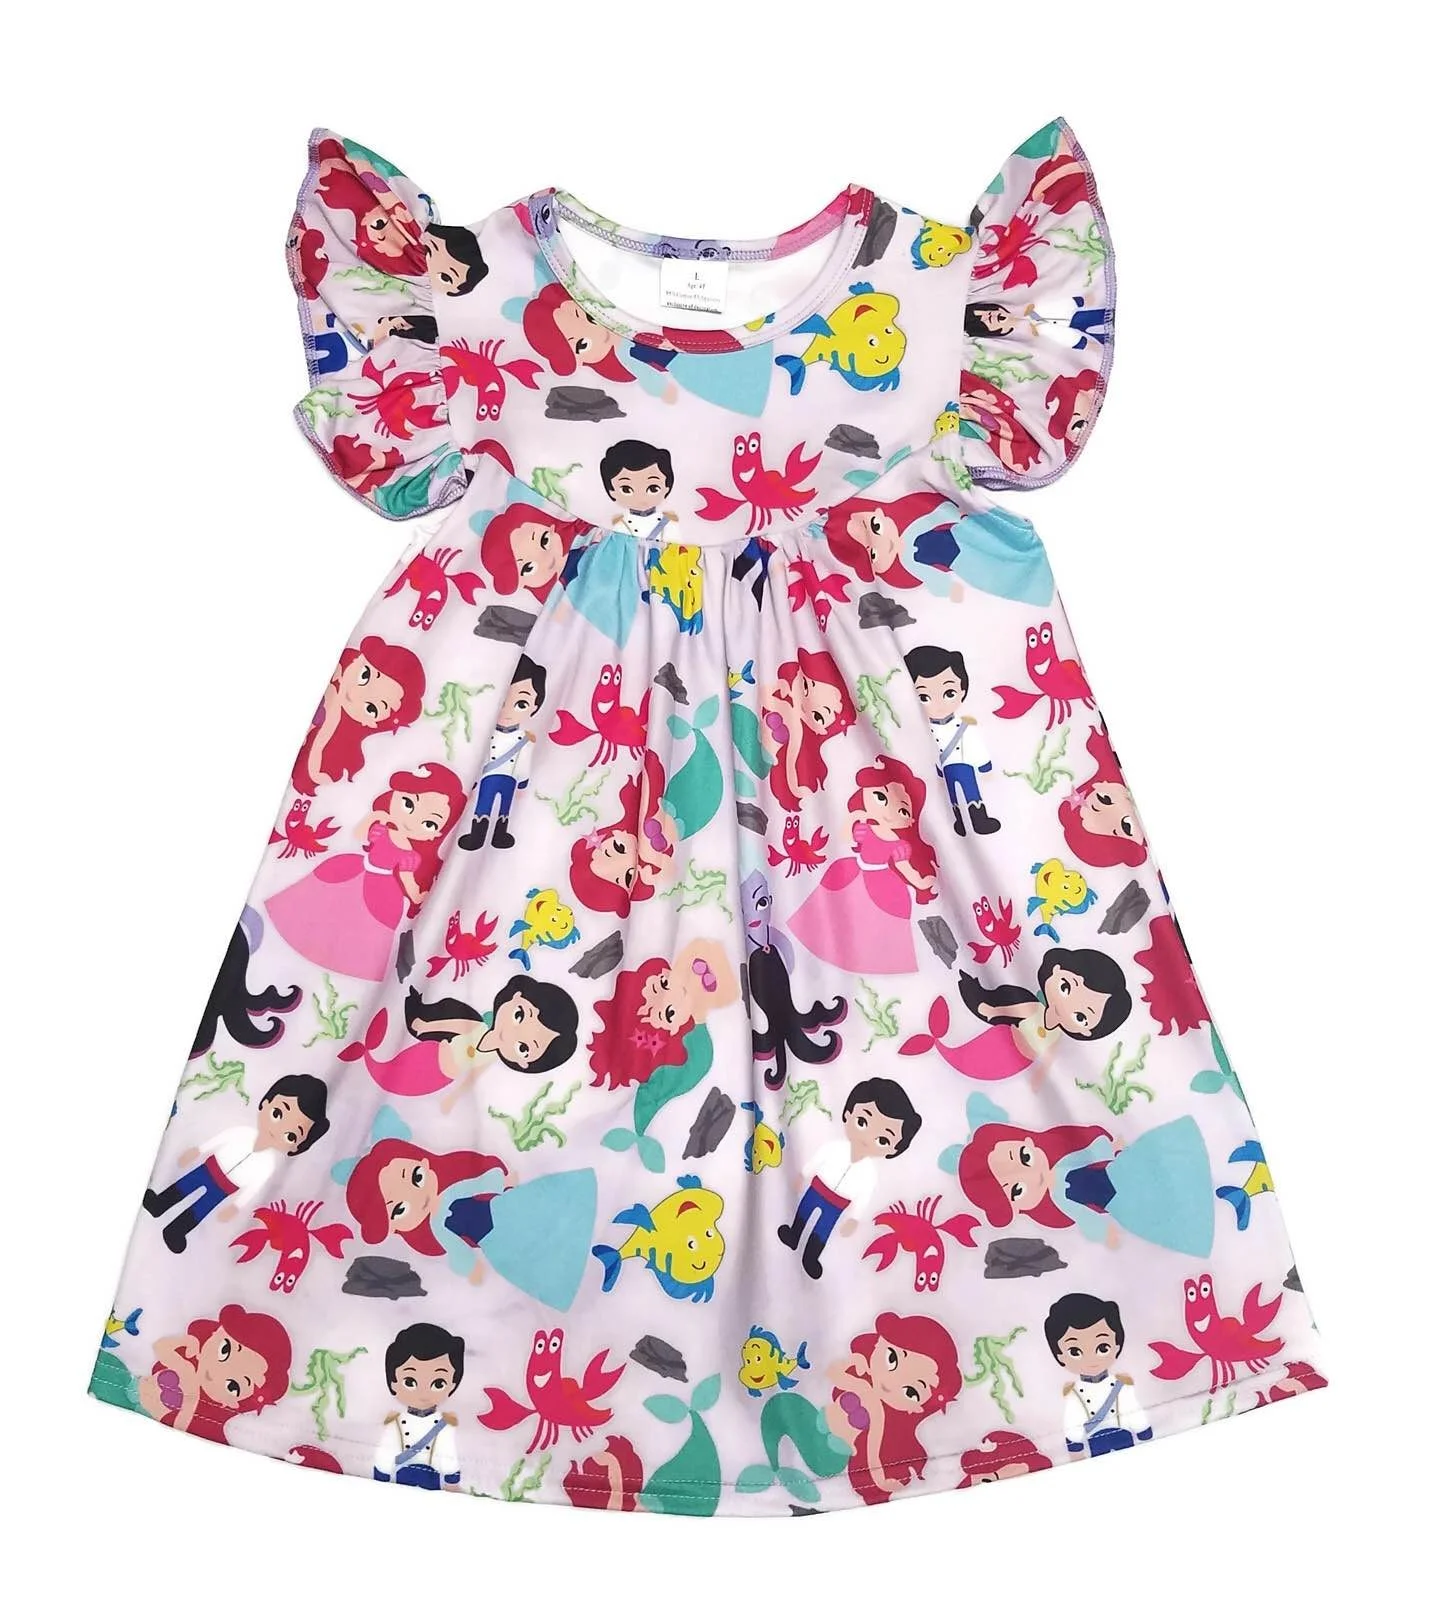 Buy Baby Girls Gift Party Dresses ...